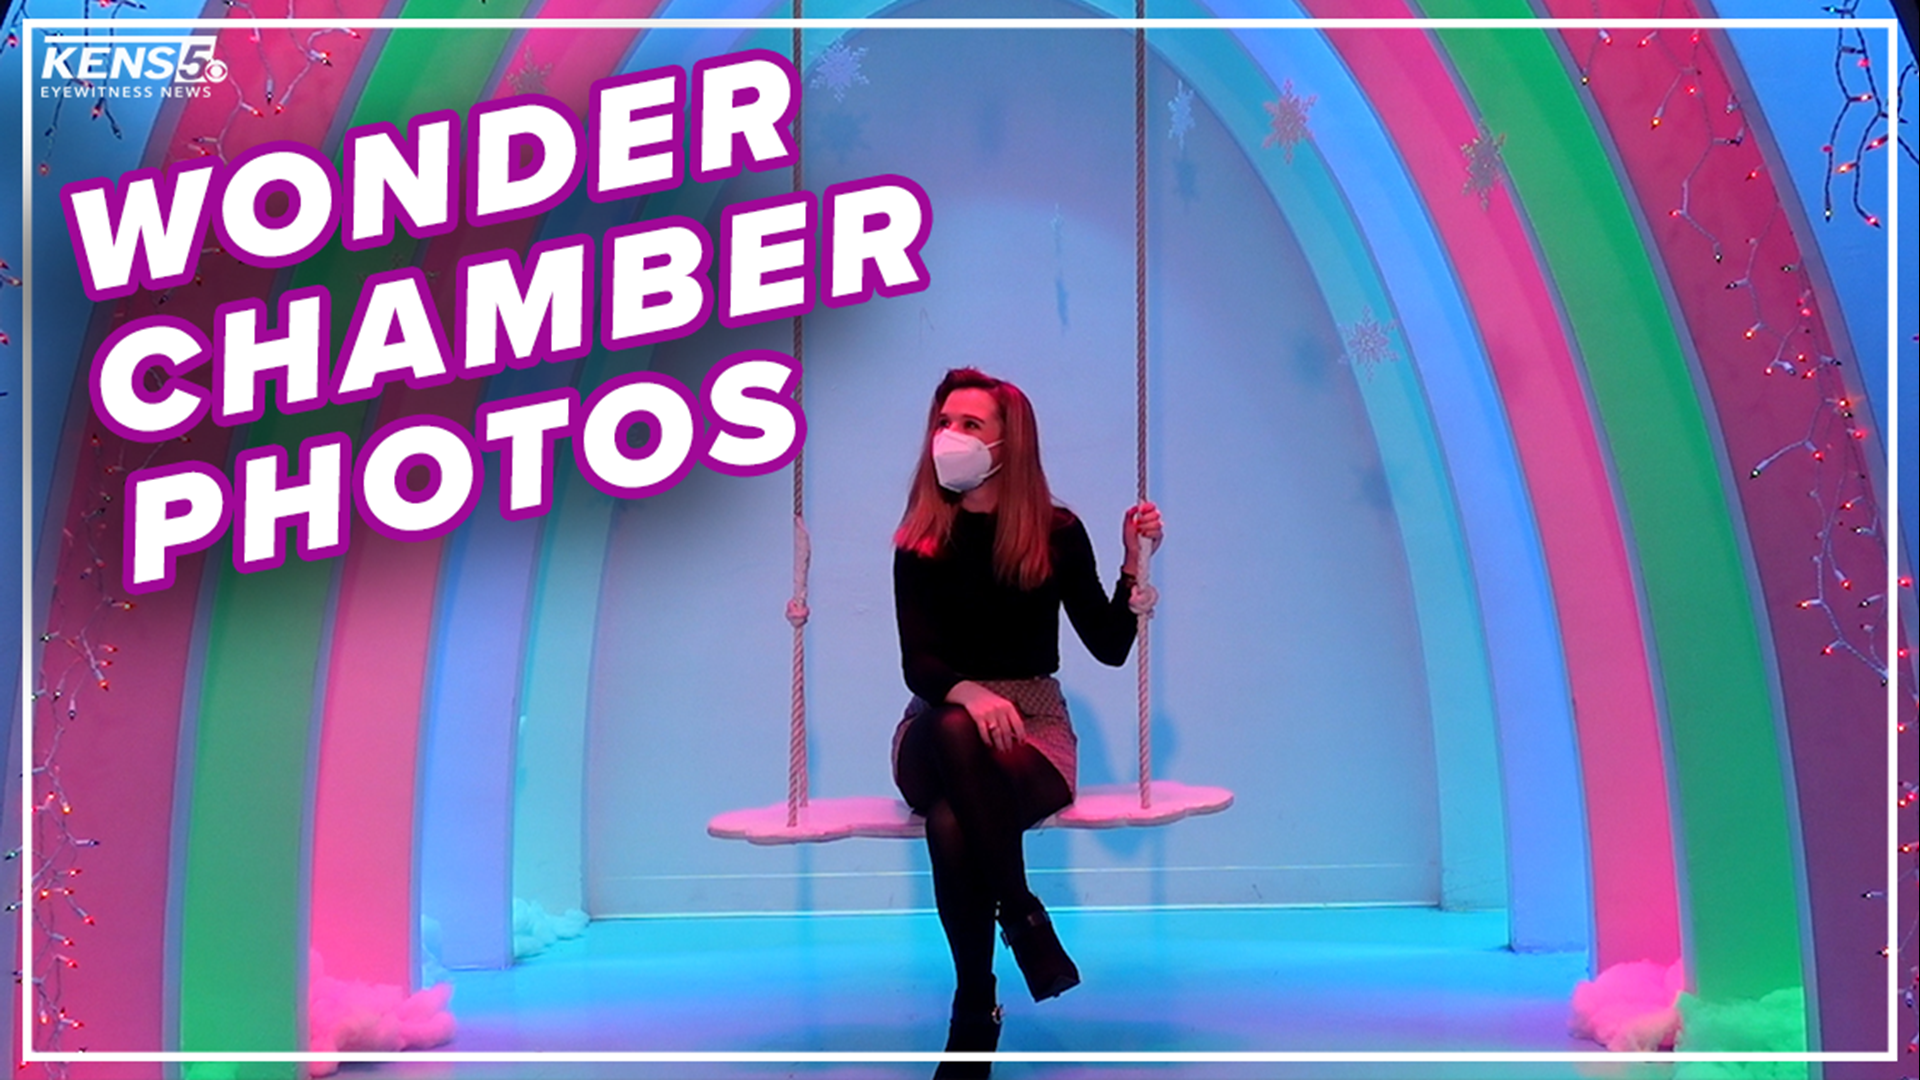 If you’re looking to explore colorful spaces made by a local artist, you might want to add the Wonder Chamber in San Antonio to your list.